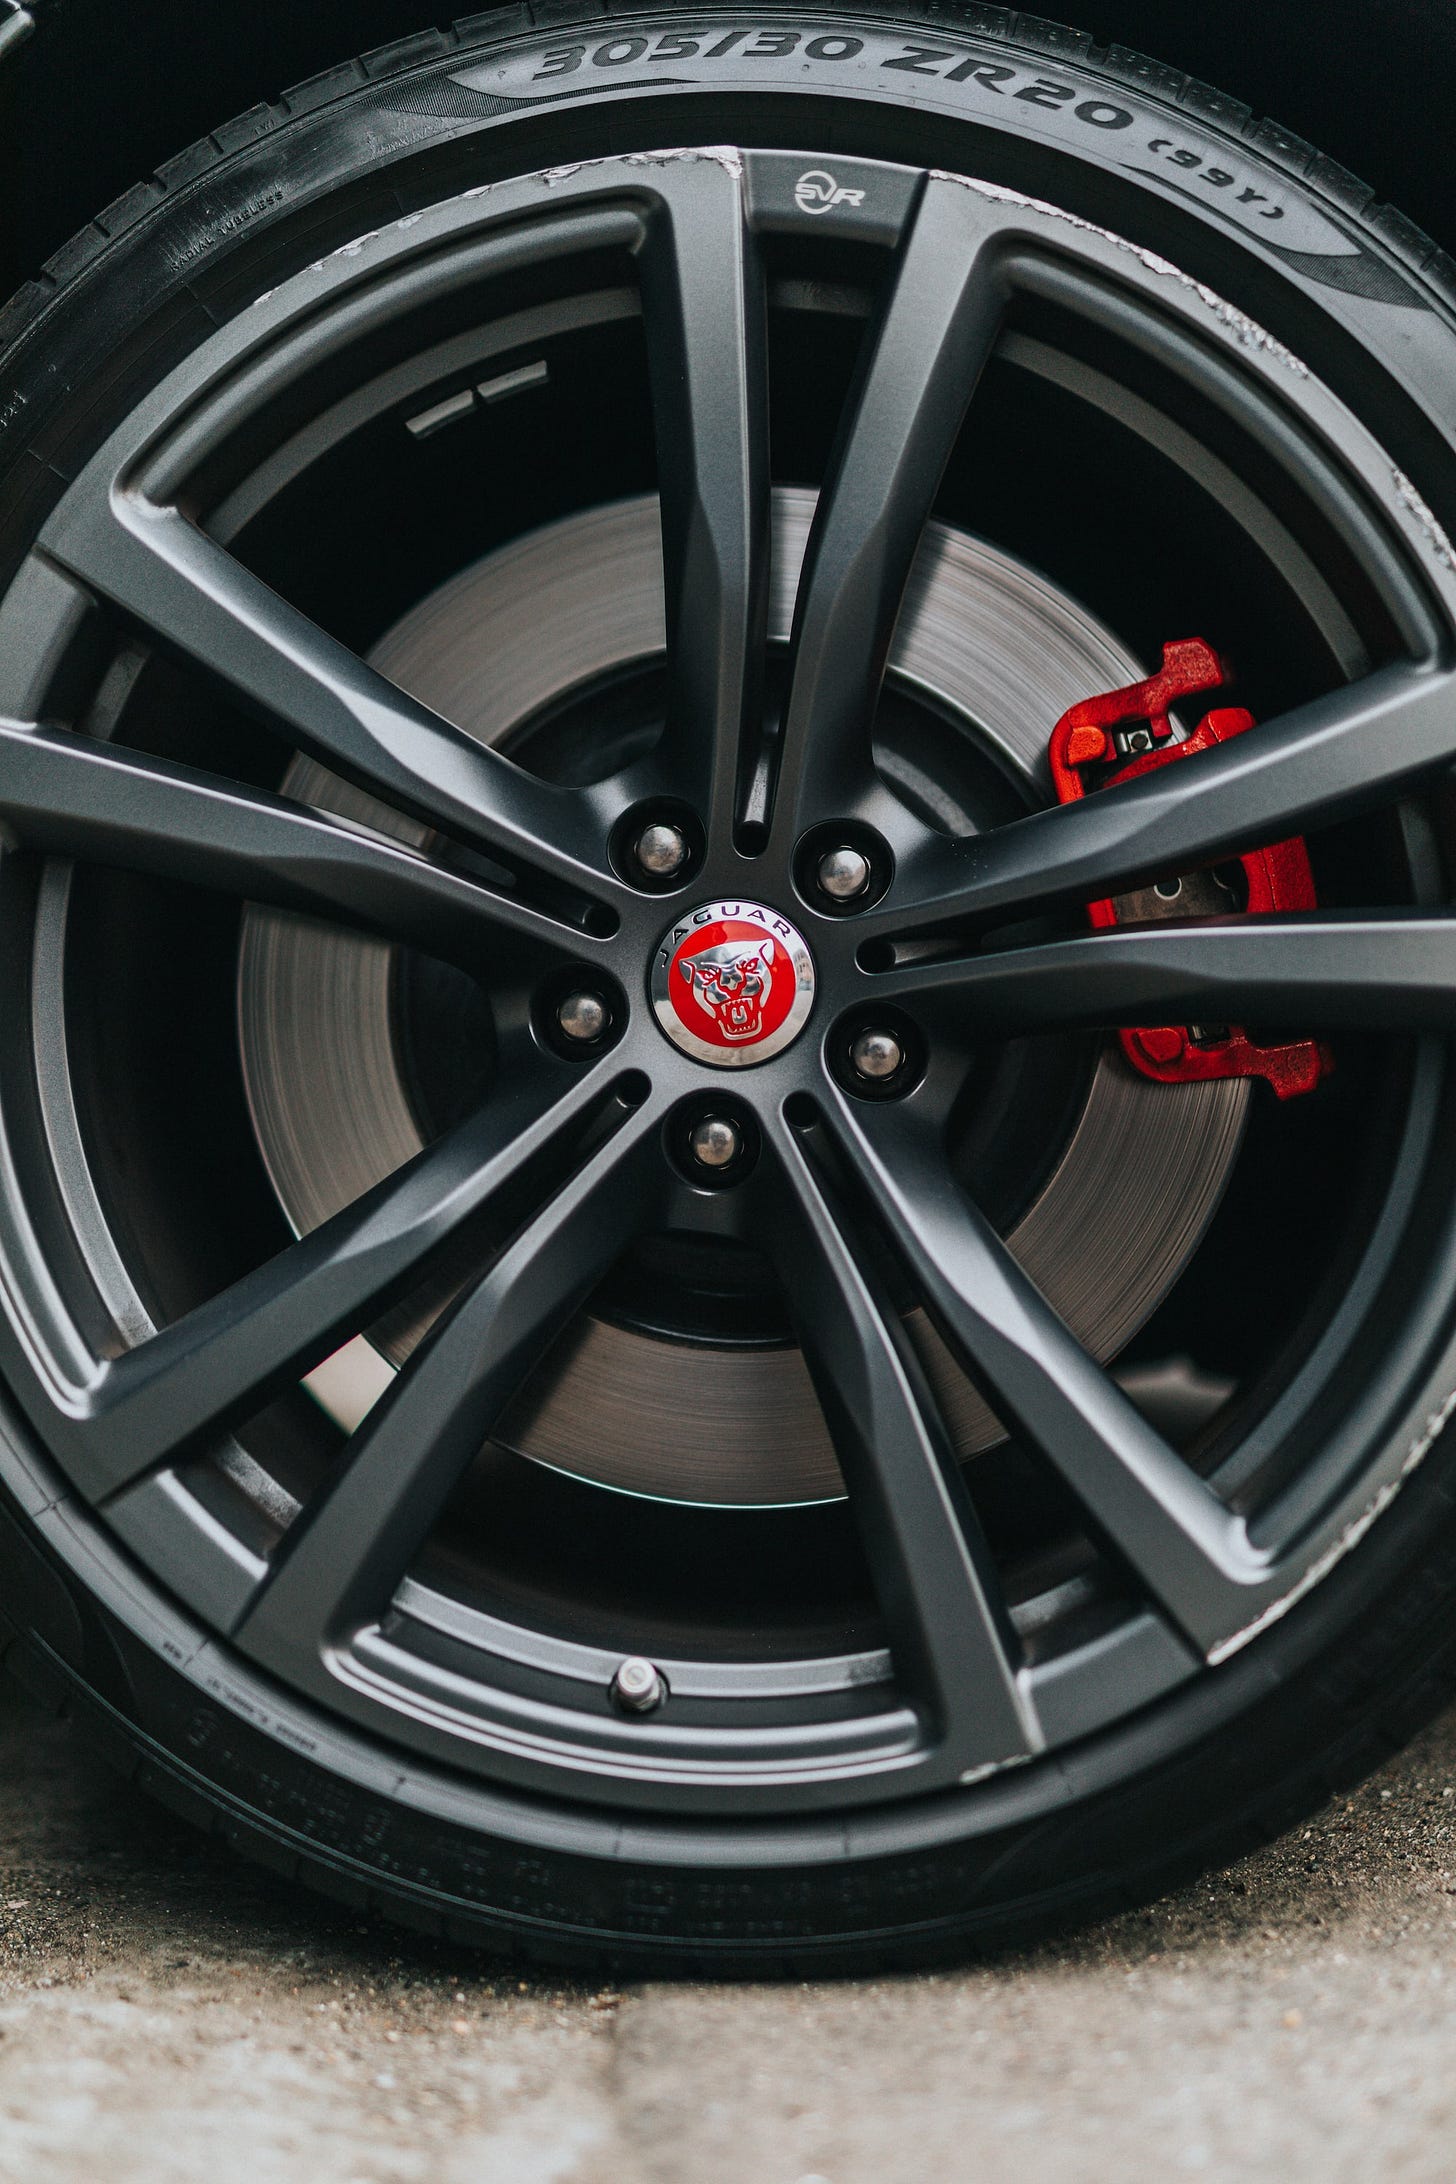 A Jaguar's tire. Run-flat tires depend on TPMS systems to function.